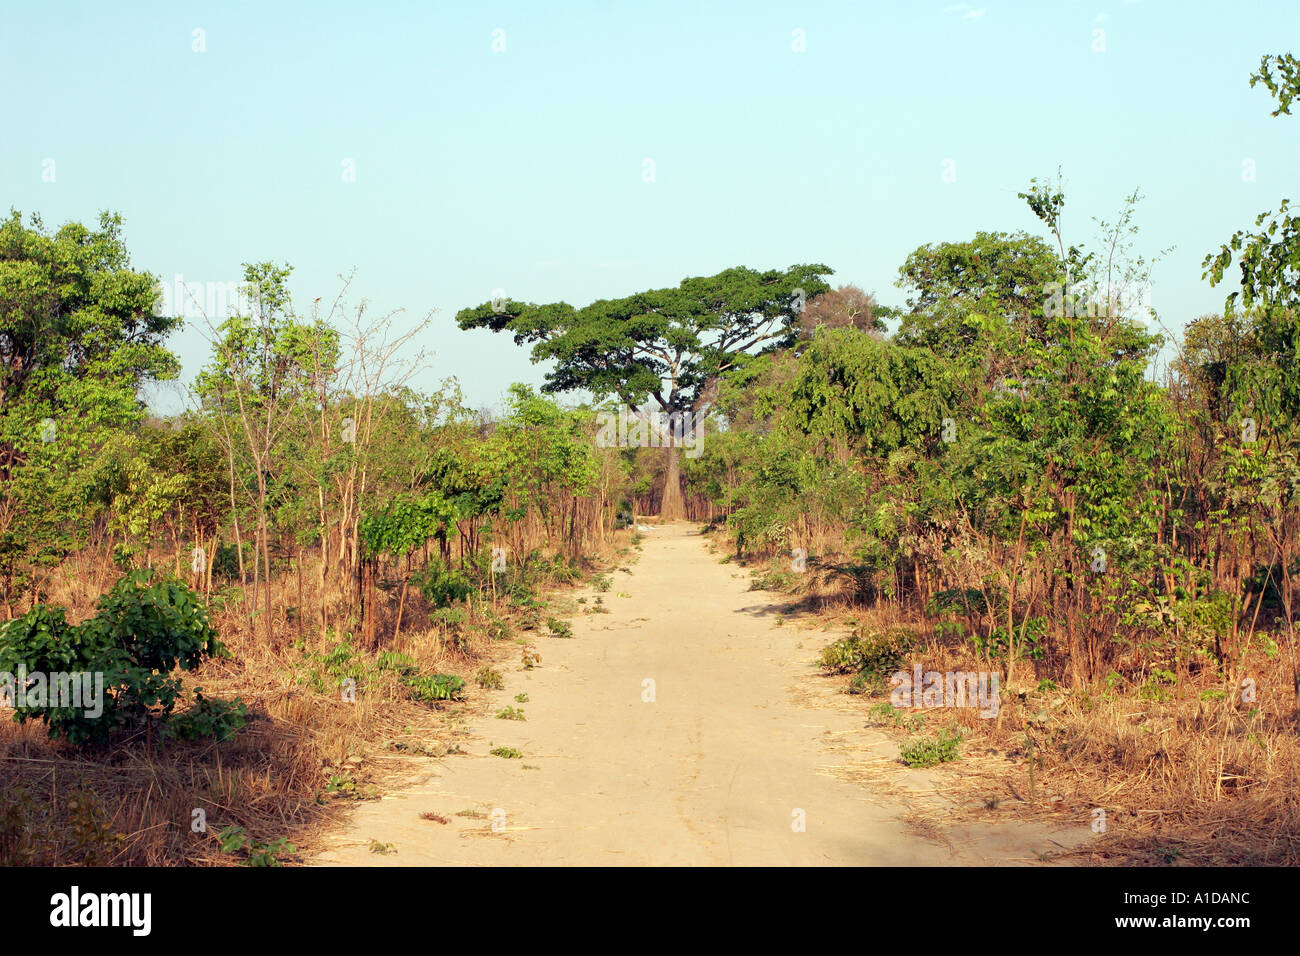 Dirt Road in Zambia with a Kachale Tree (Ochna pulchra) in the centre at the end Stock Photo